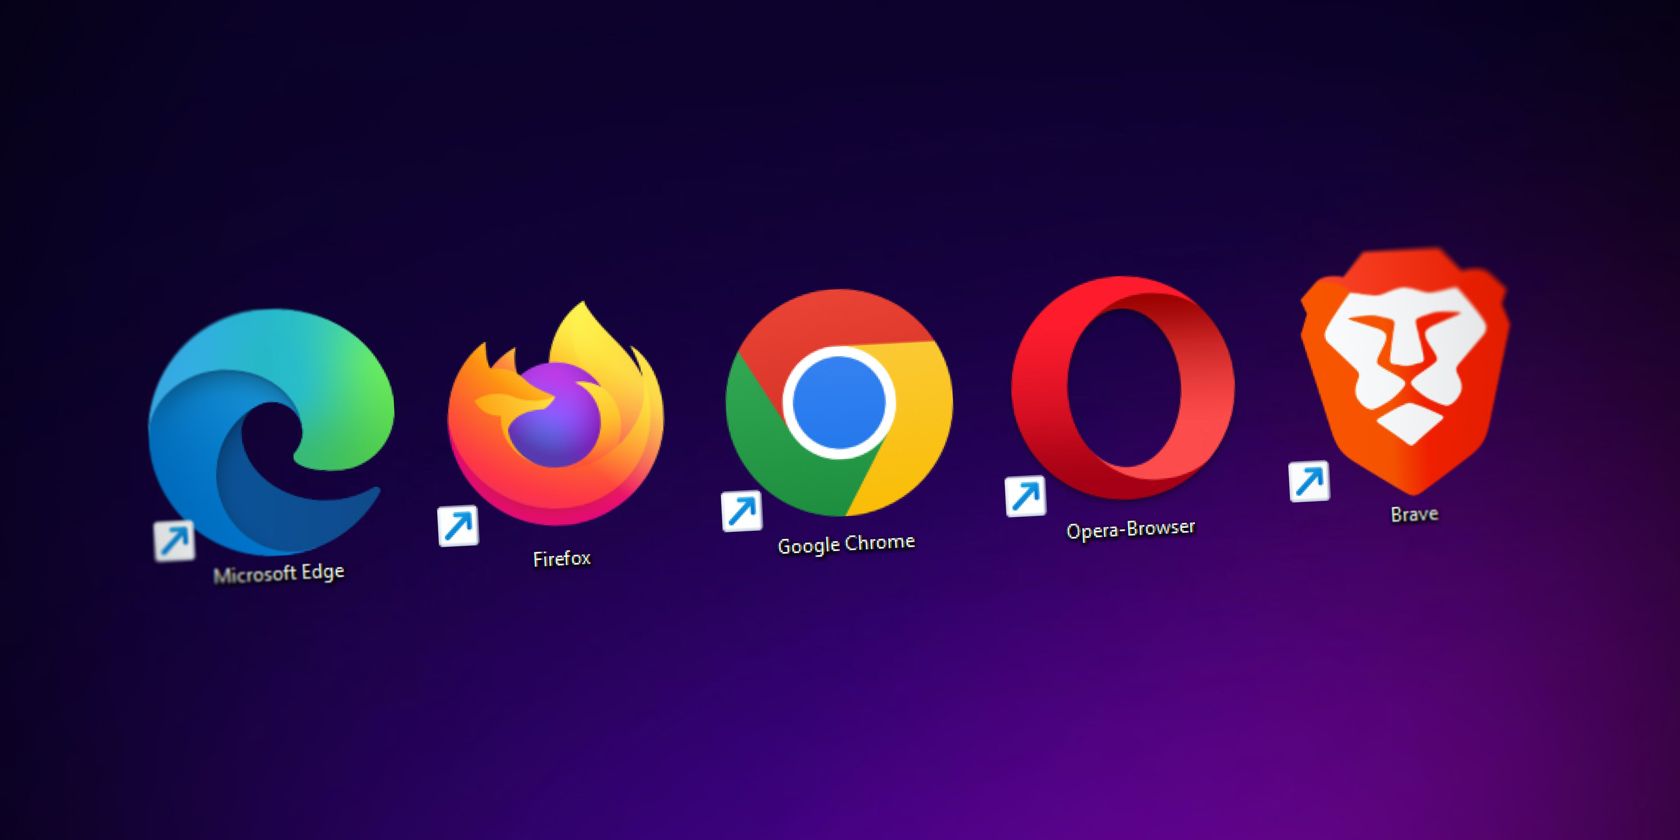 edge firefox chrome opera and brave logos on a background